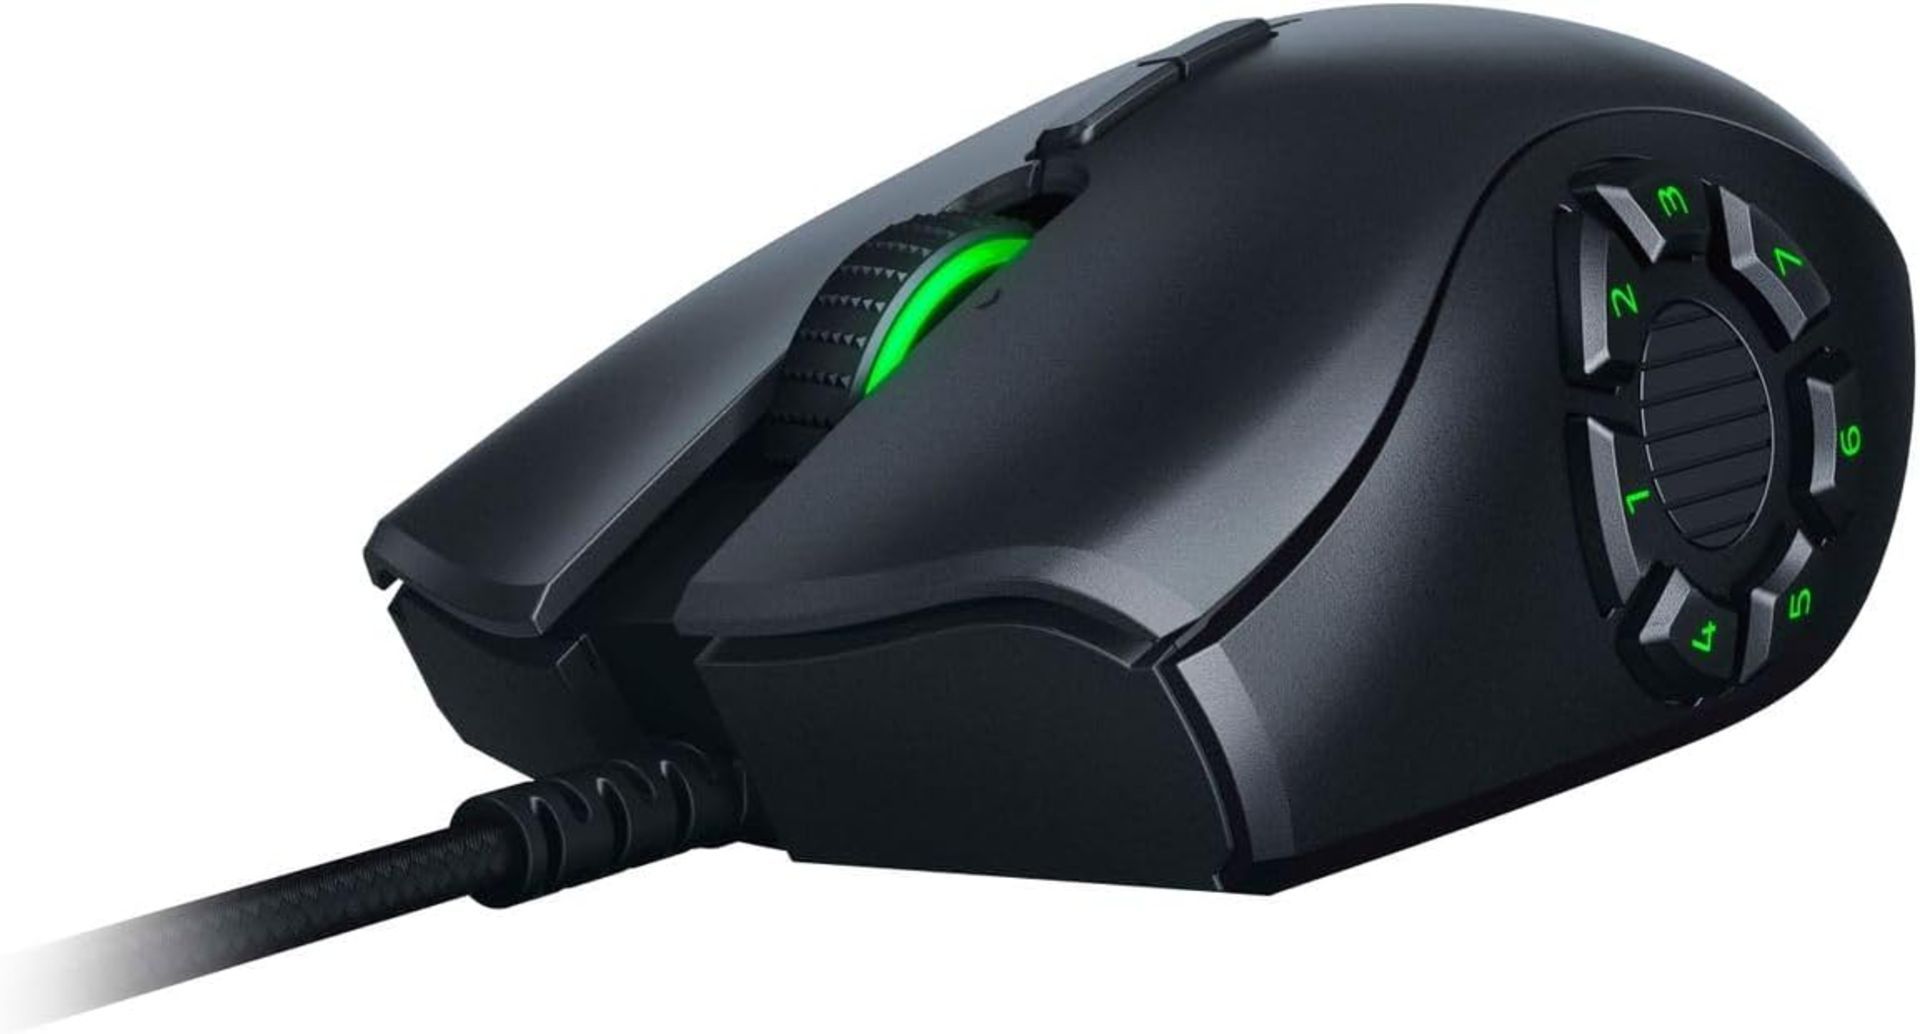 2x BRAND NEW FACTORY SEALED RAZER Naga Trinity MOBA/MMO Wired Gaming Mouse. RRP £59.99 EACH.